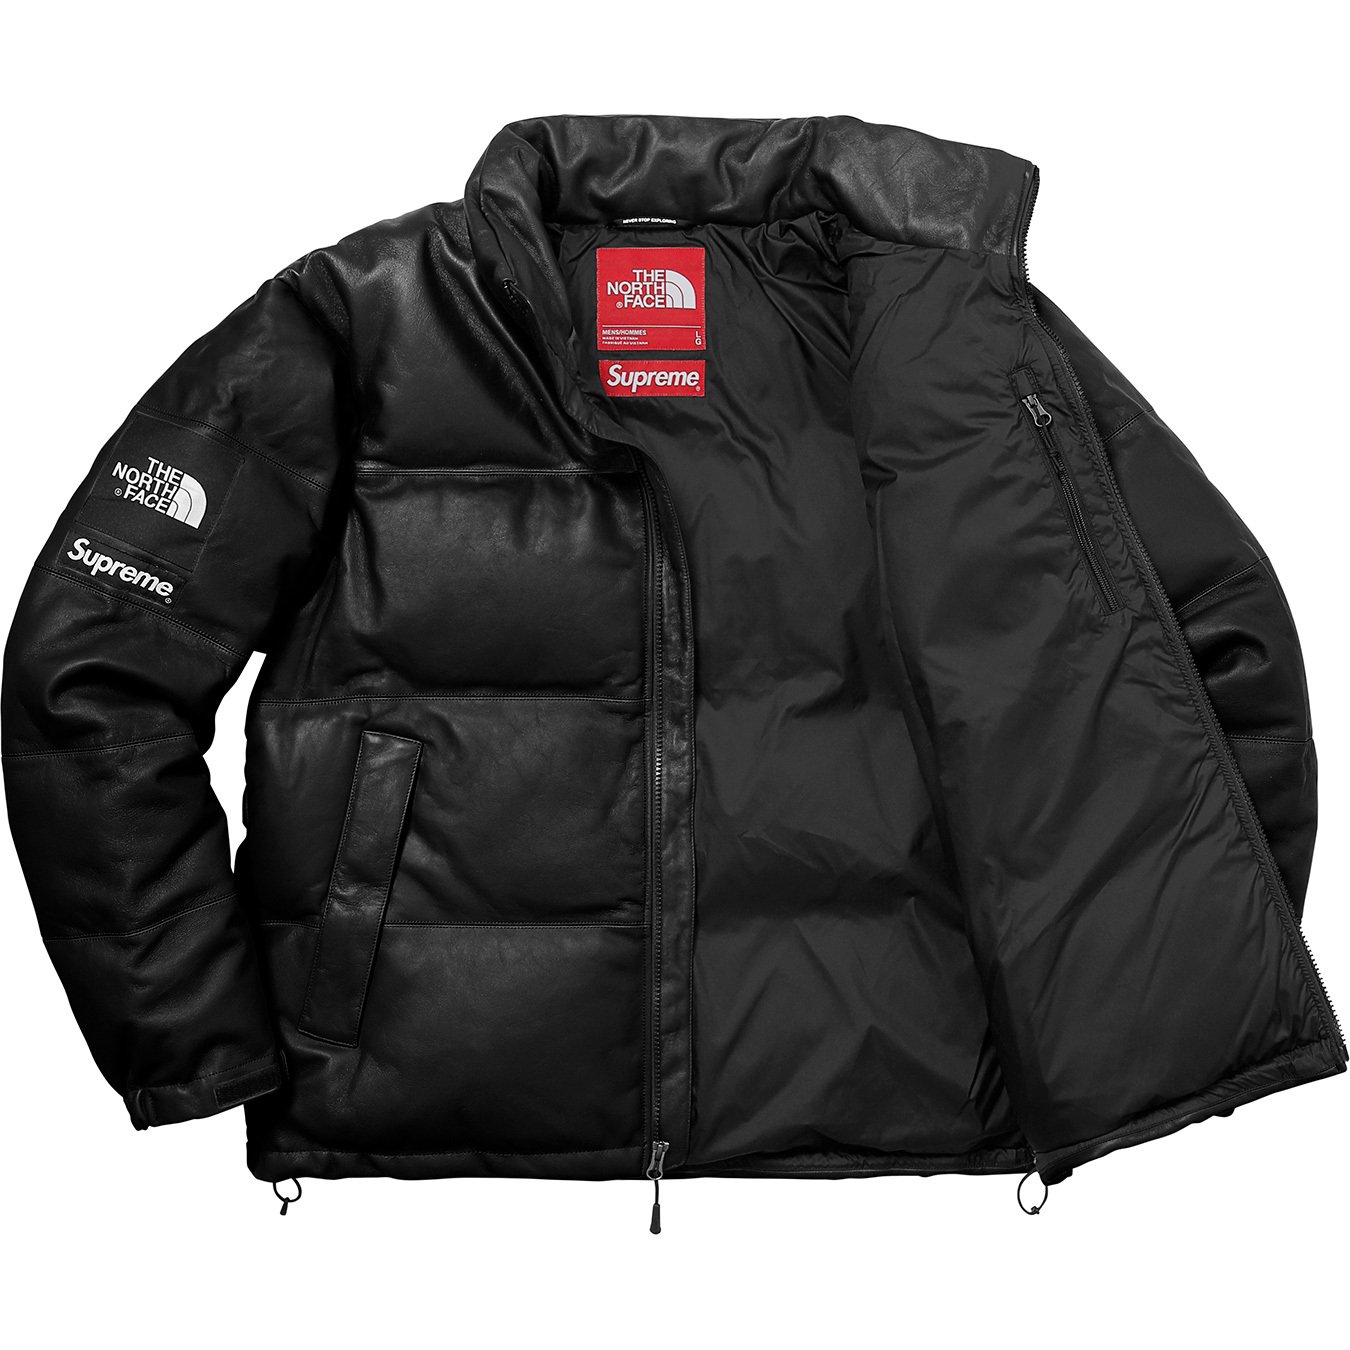 Kabelbaan Berg kleding op cabine The North Face Leather Nuptse Jacket - fall winter 2017 - Supreme